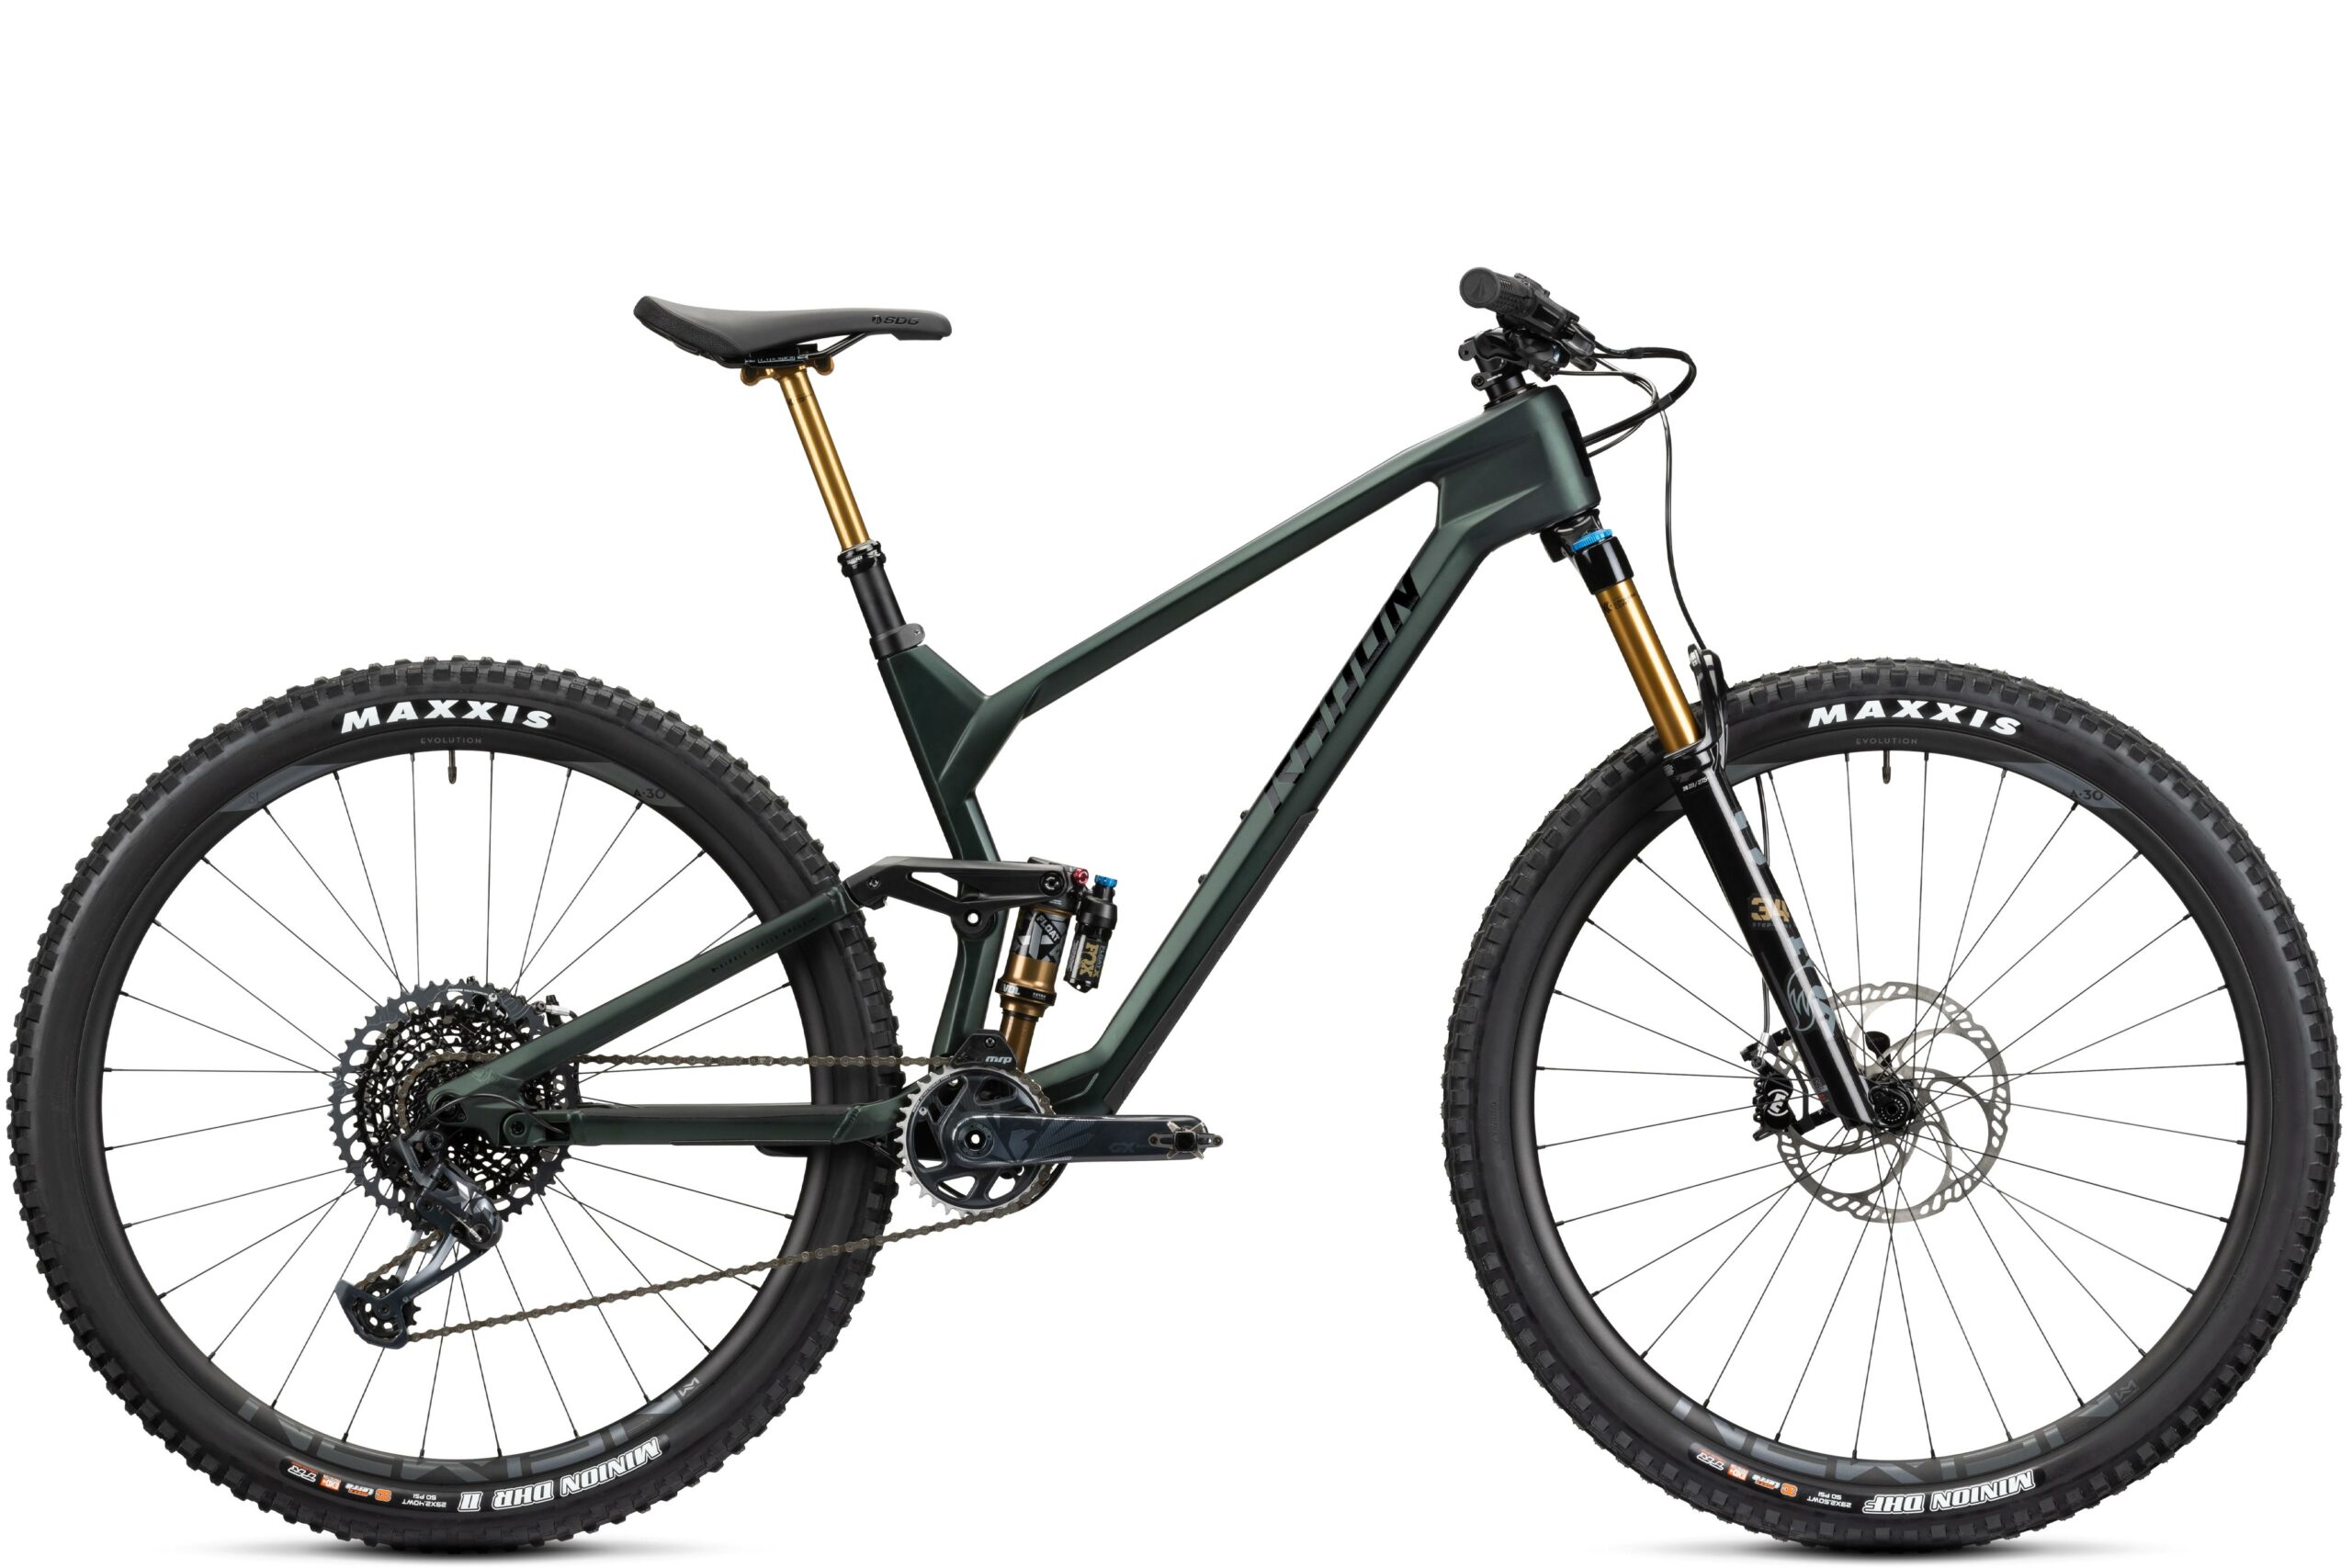 SKEEN TRAIL 10.0 HD 2022 Review